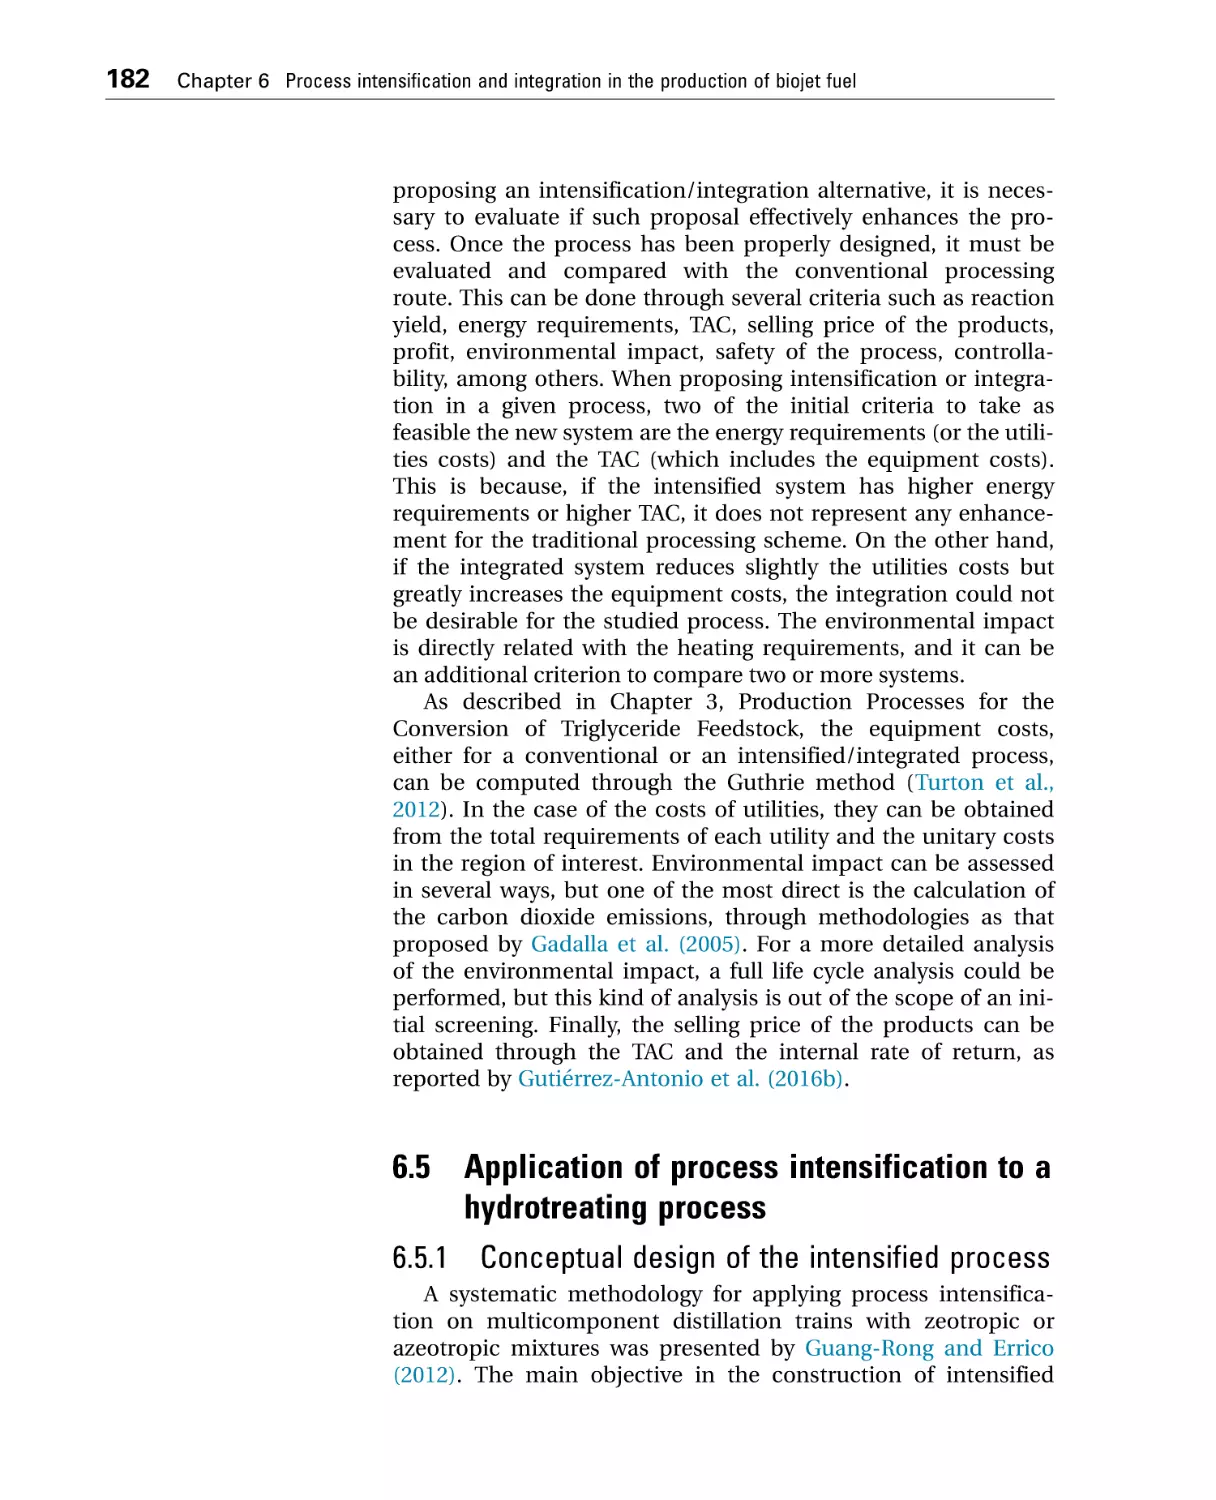 6.5 Application of process intensification to a hydrotreating process
6.5.1 Conceptual design of the intensified process